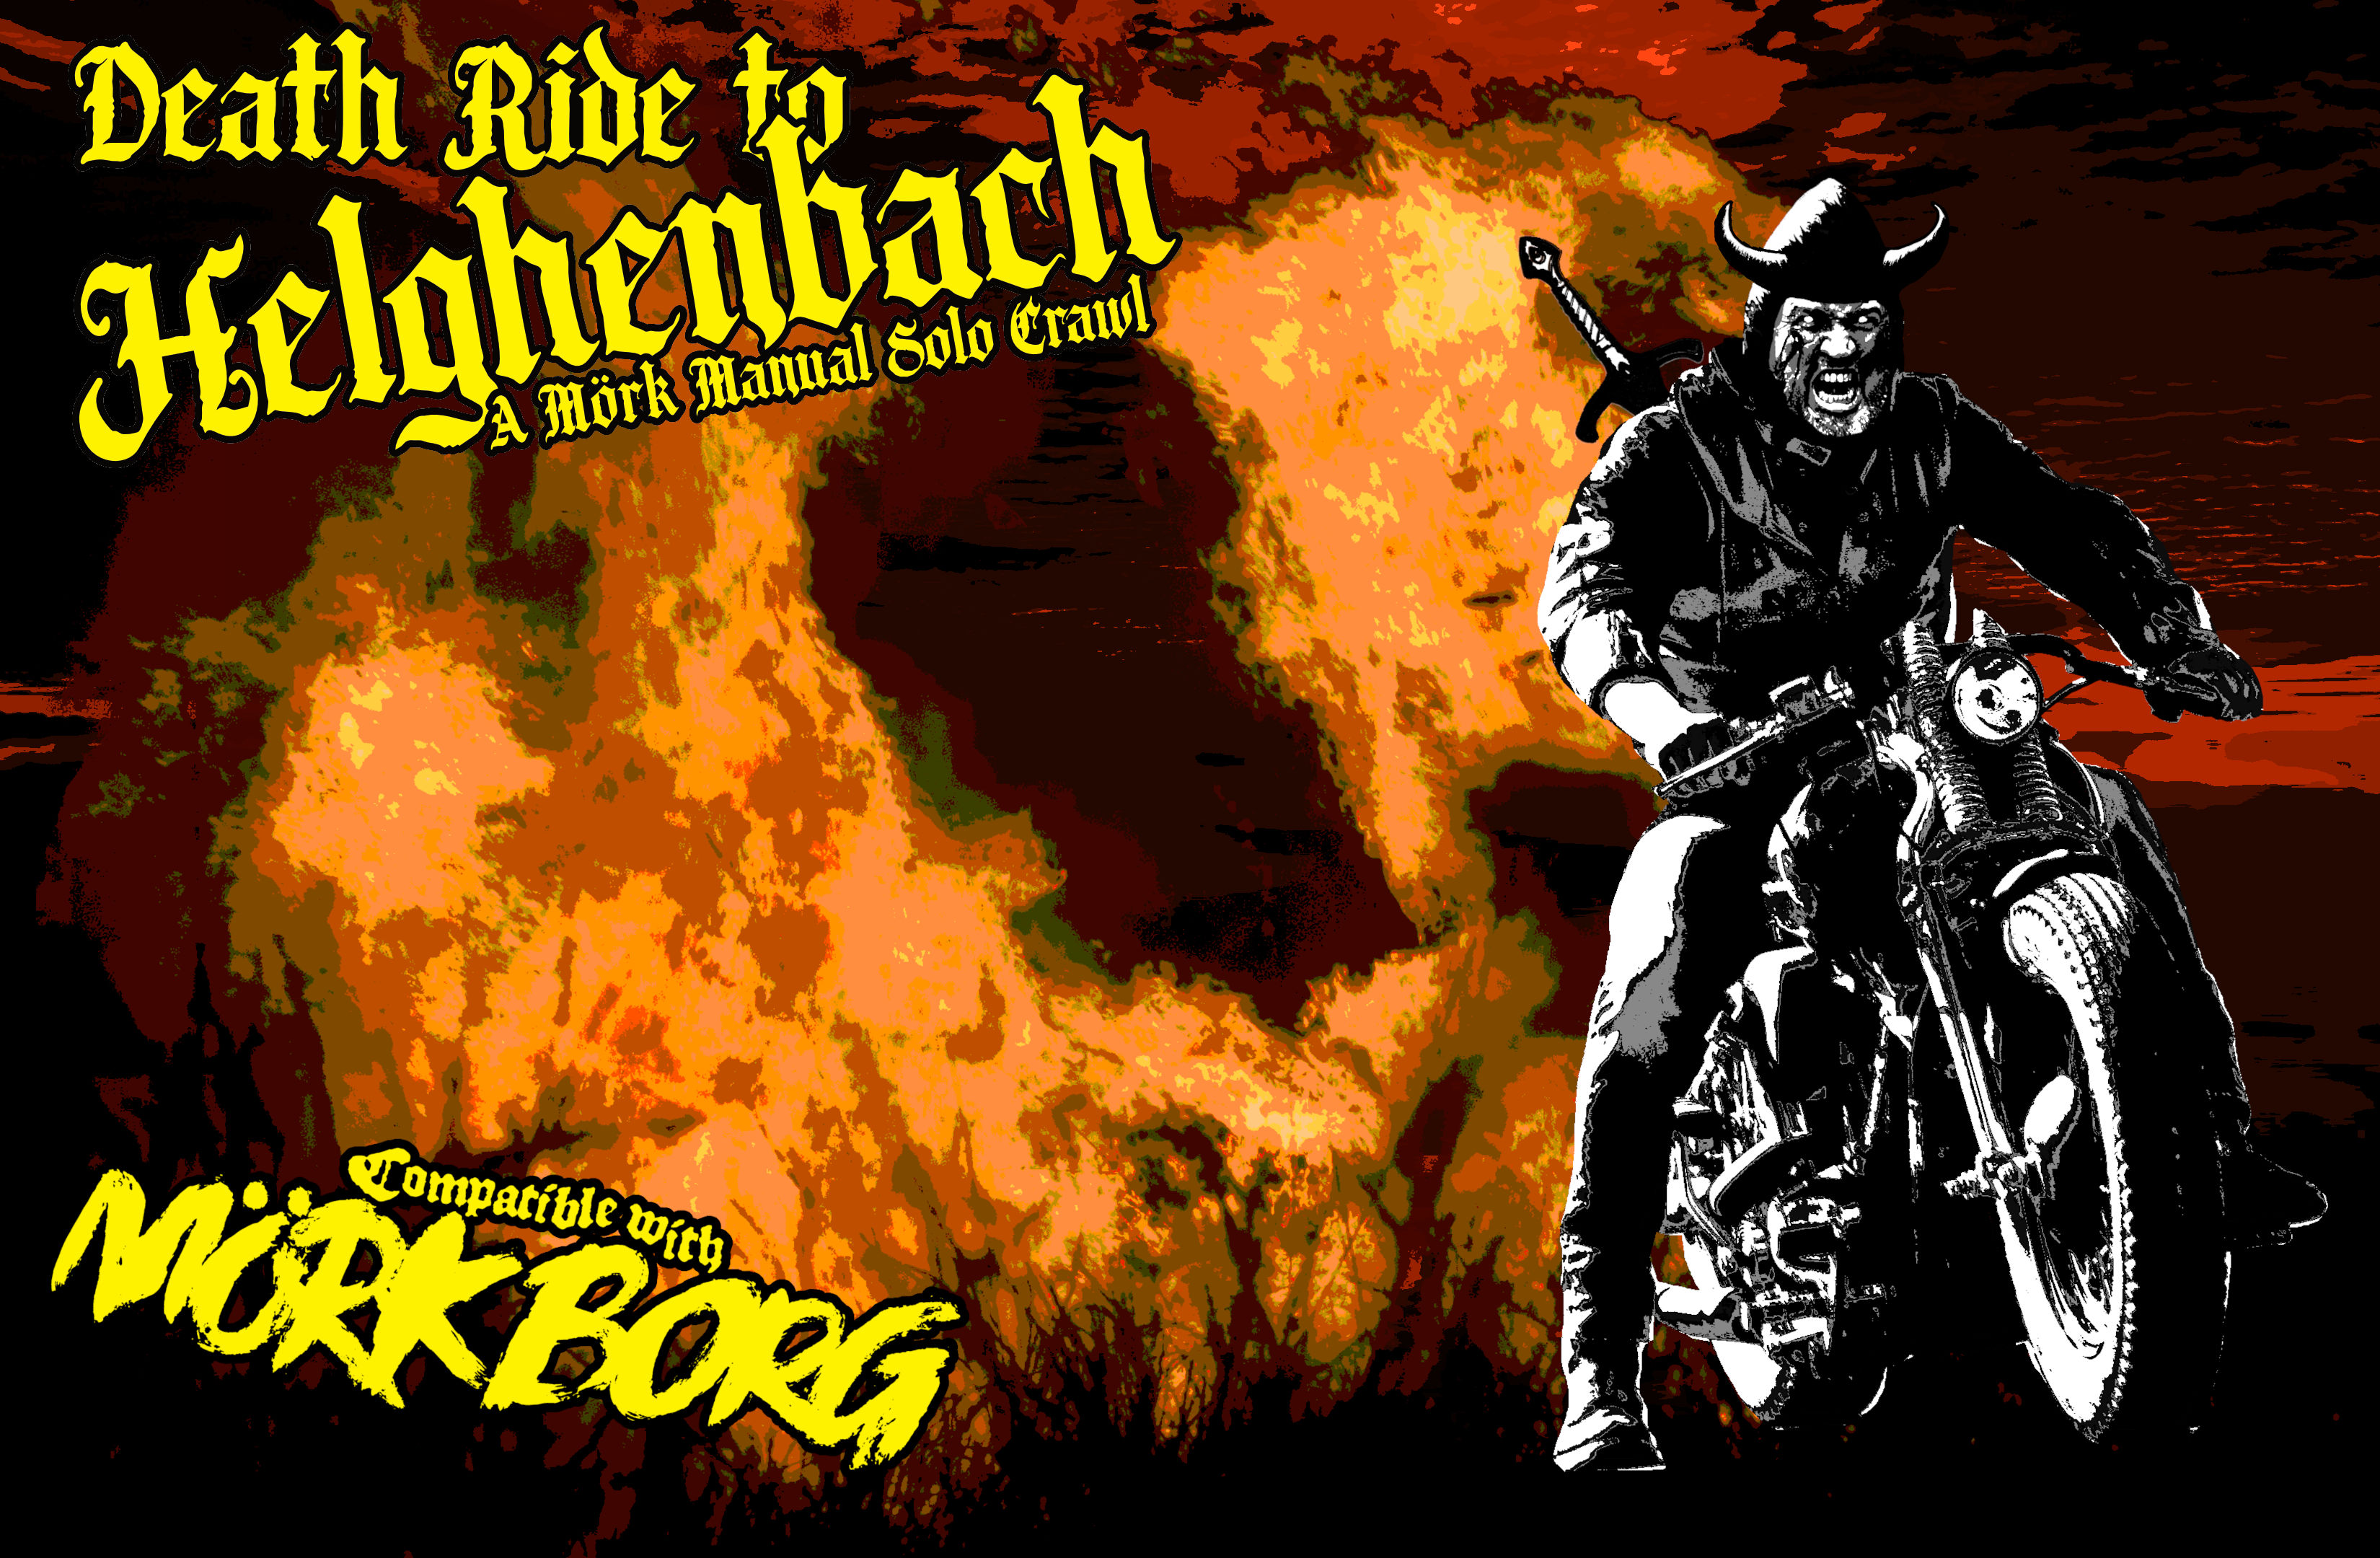 Death Ride to Helghenbach